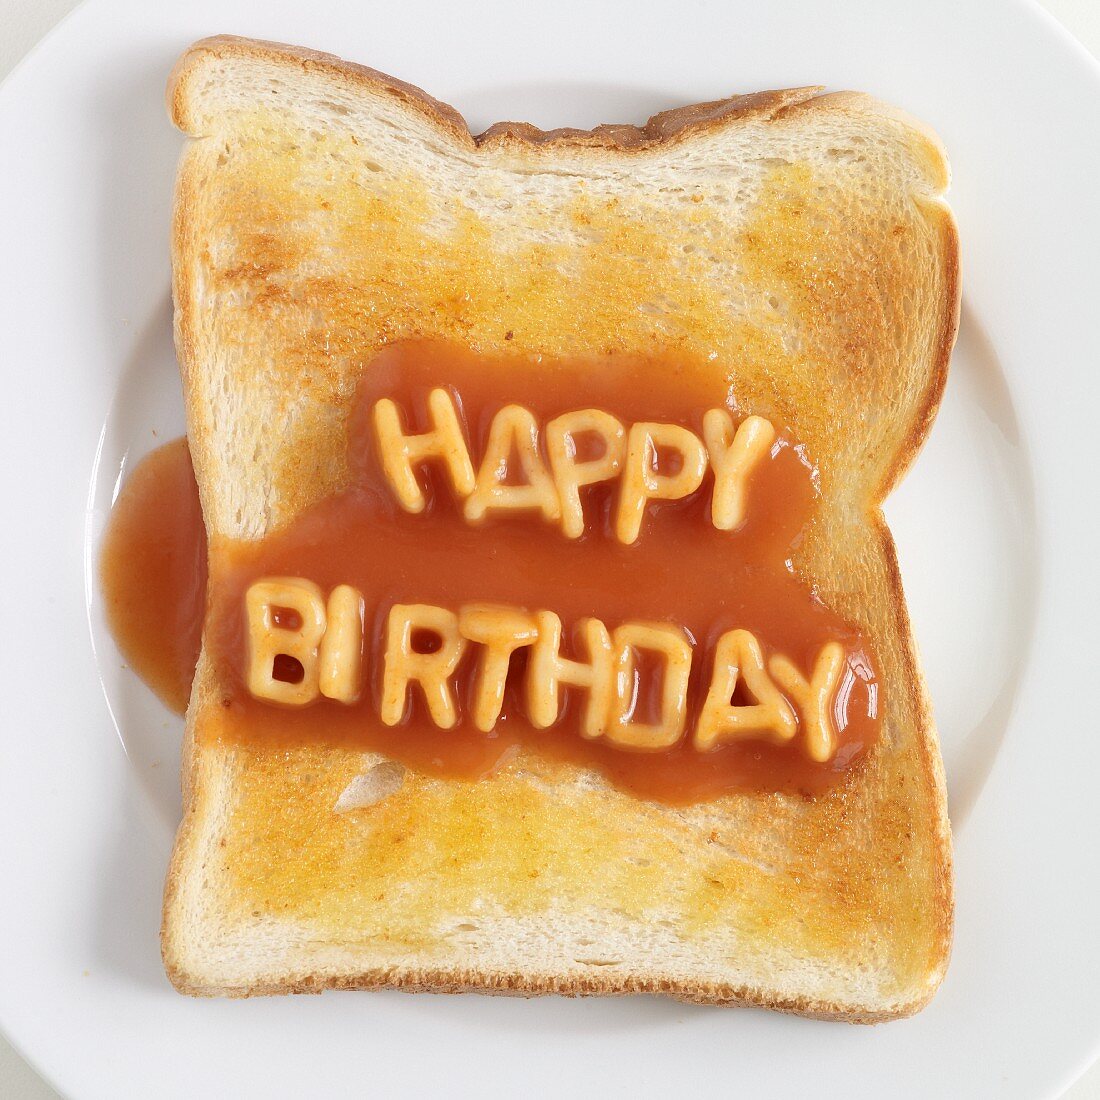 Toast topped with spaghetti letters spelling out HAPPY BIRTHDAY